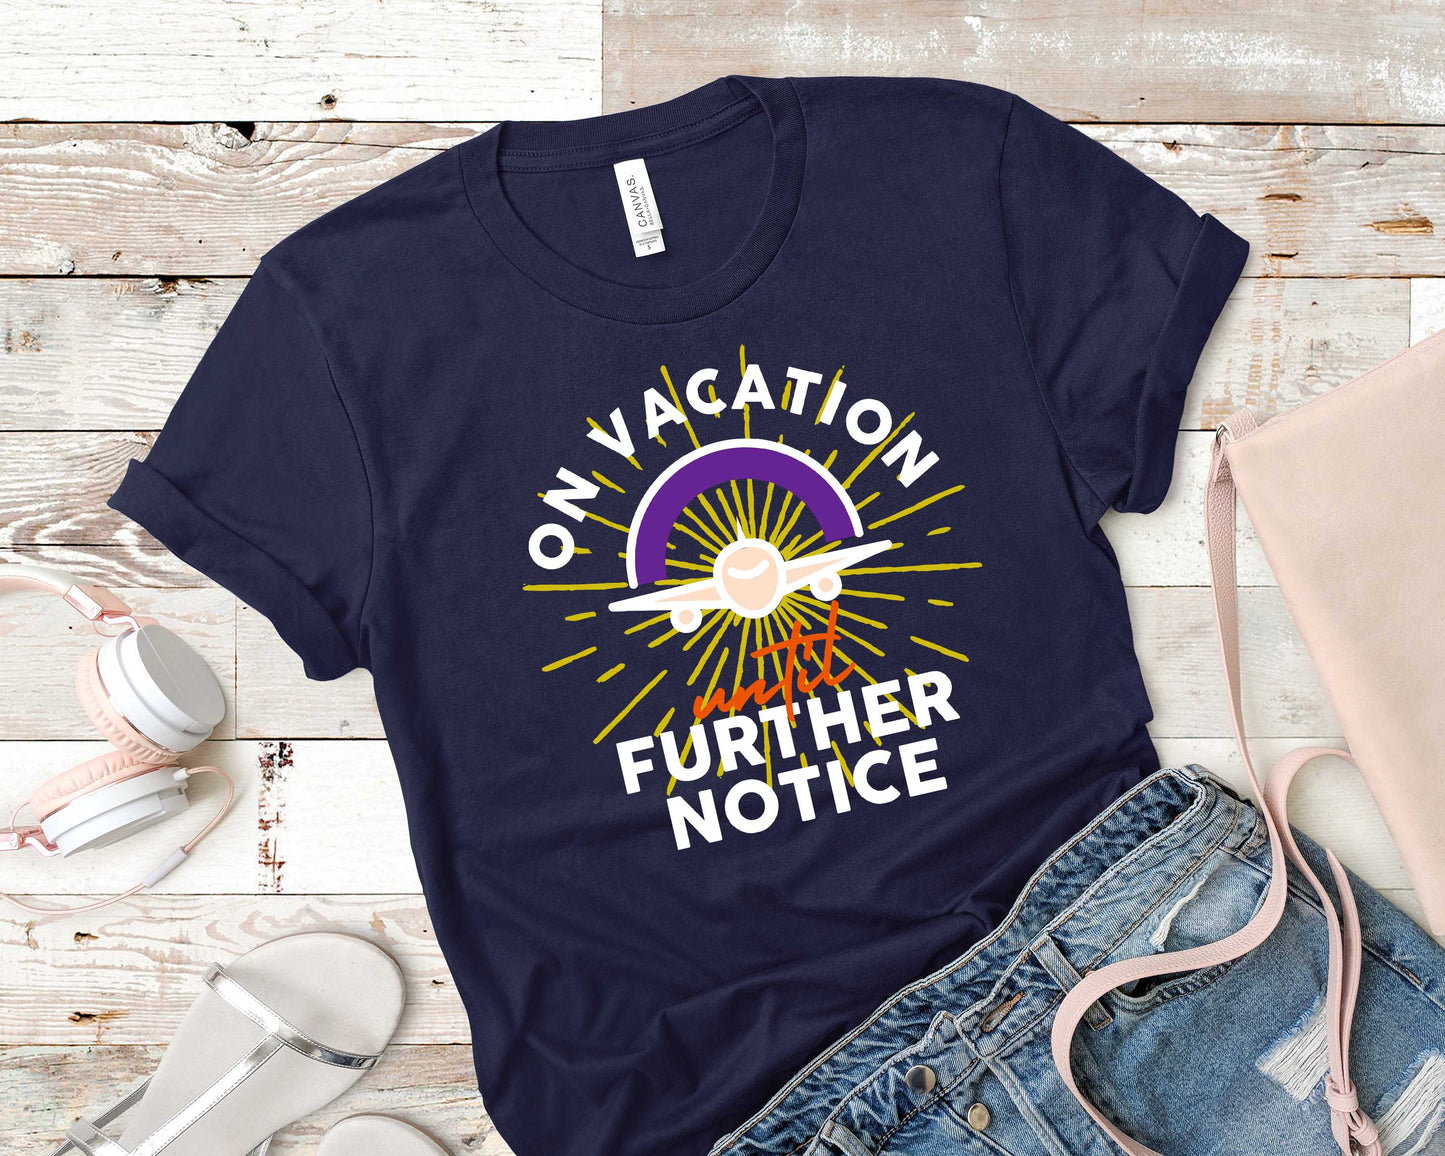 On Vacation Until Further Notice - Travel/Vacation